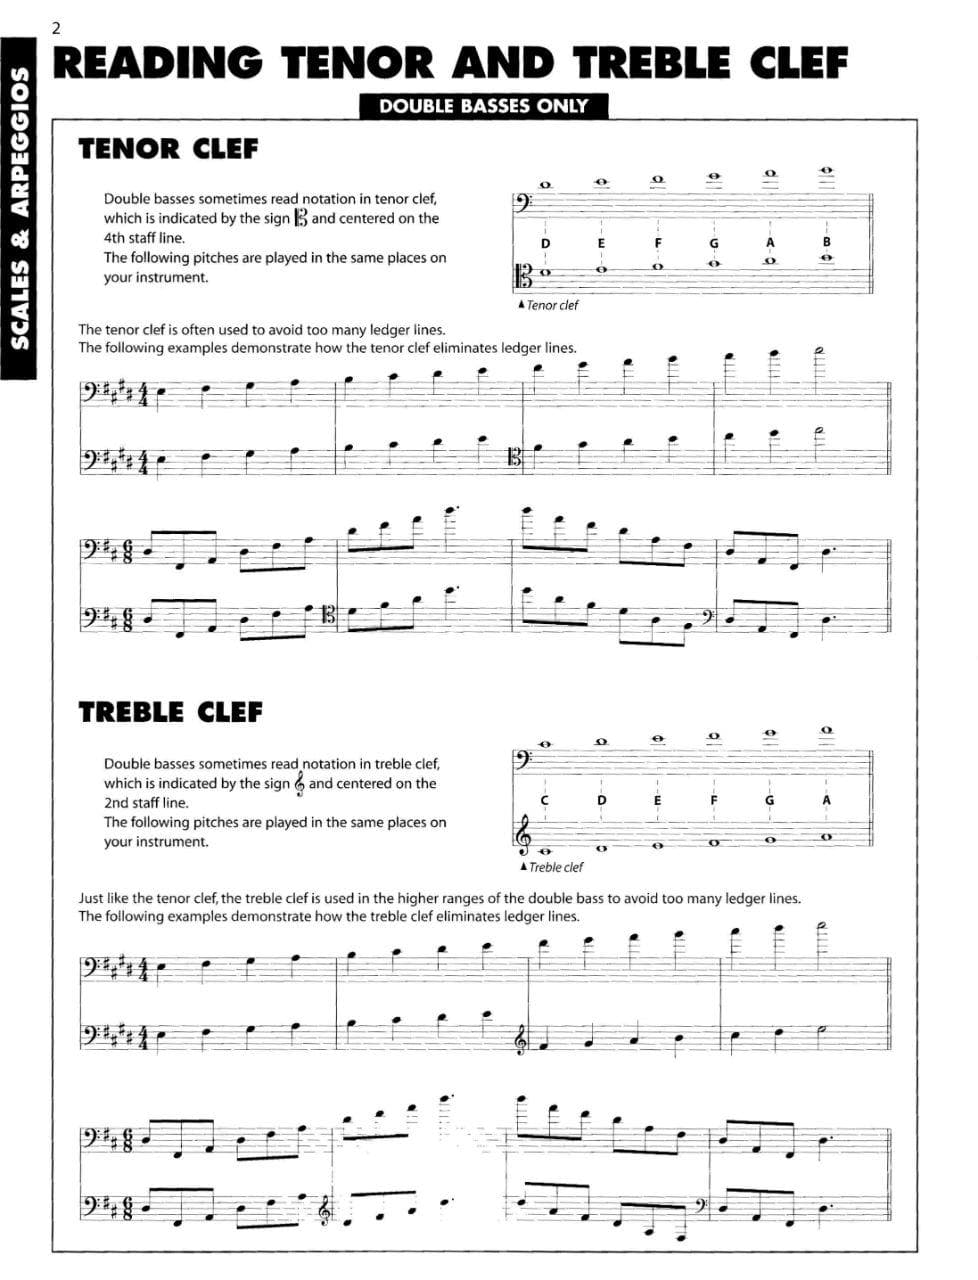 Advanced Technique for Strings - Bass - by Allen/Gillespie/Hayes - Hal Leonard Publication